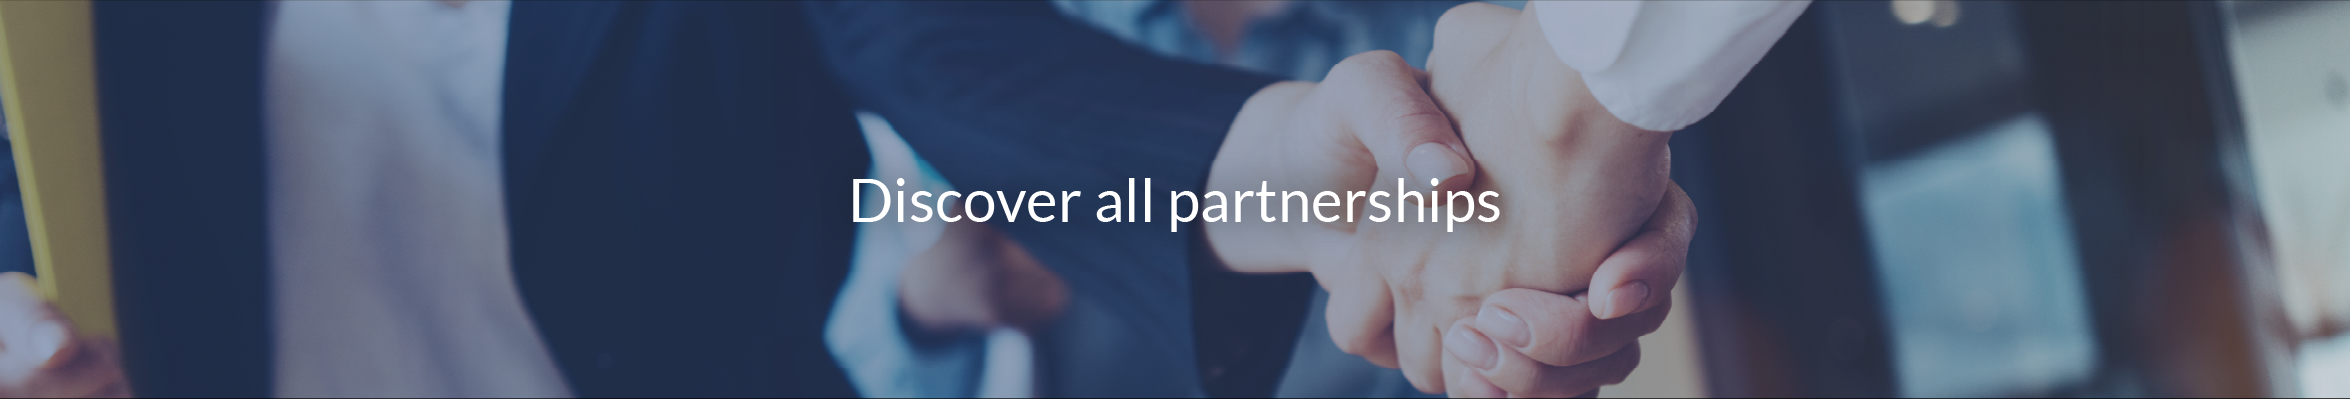 Discover all partnerships